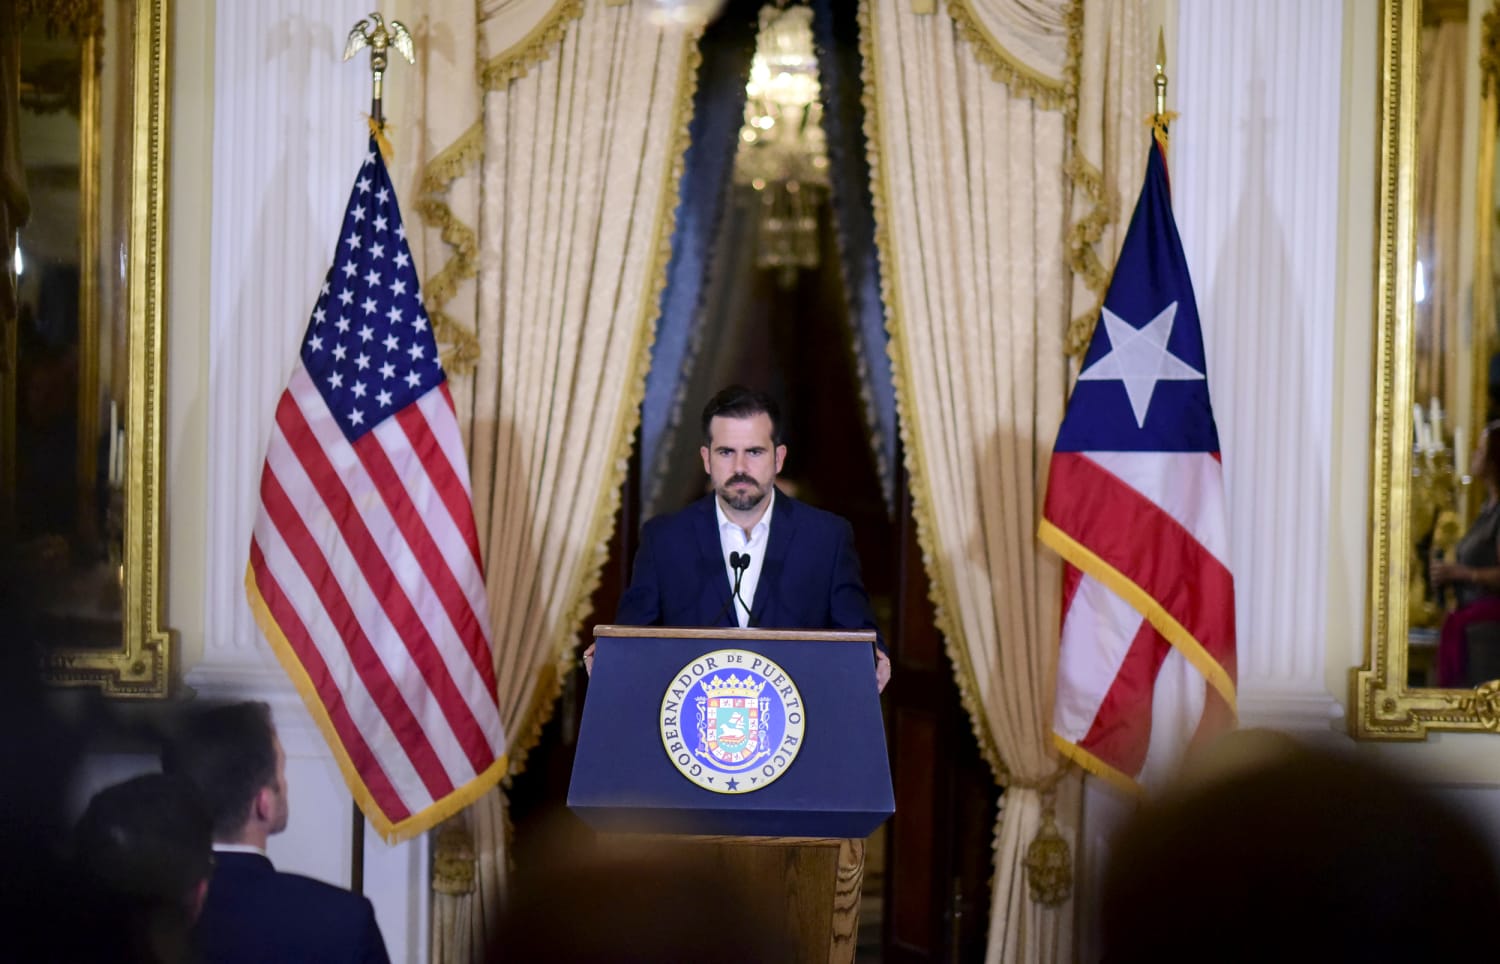 Diacrítico Y equipo monte Vesubio Puerto Rico governor says he's not resigning after private chat scandal